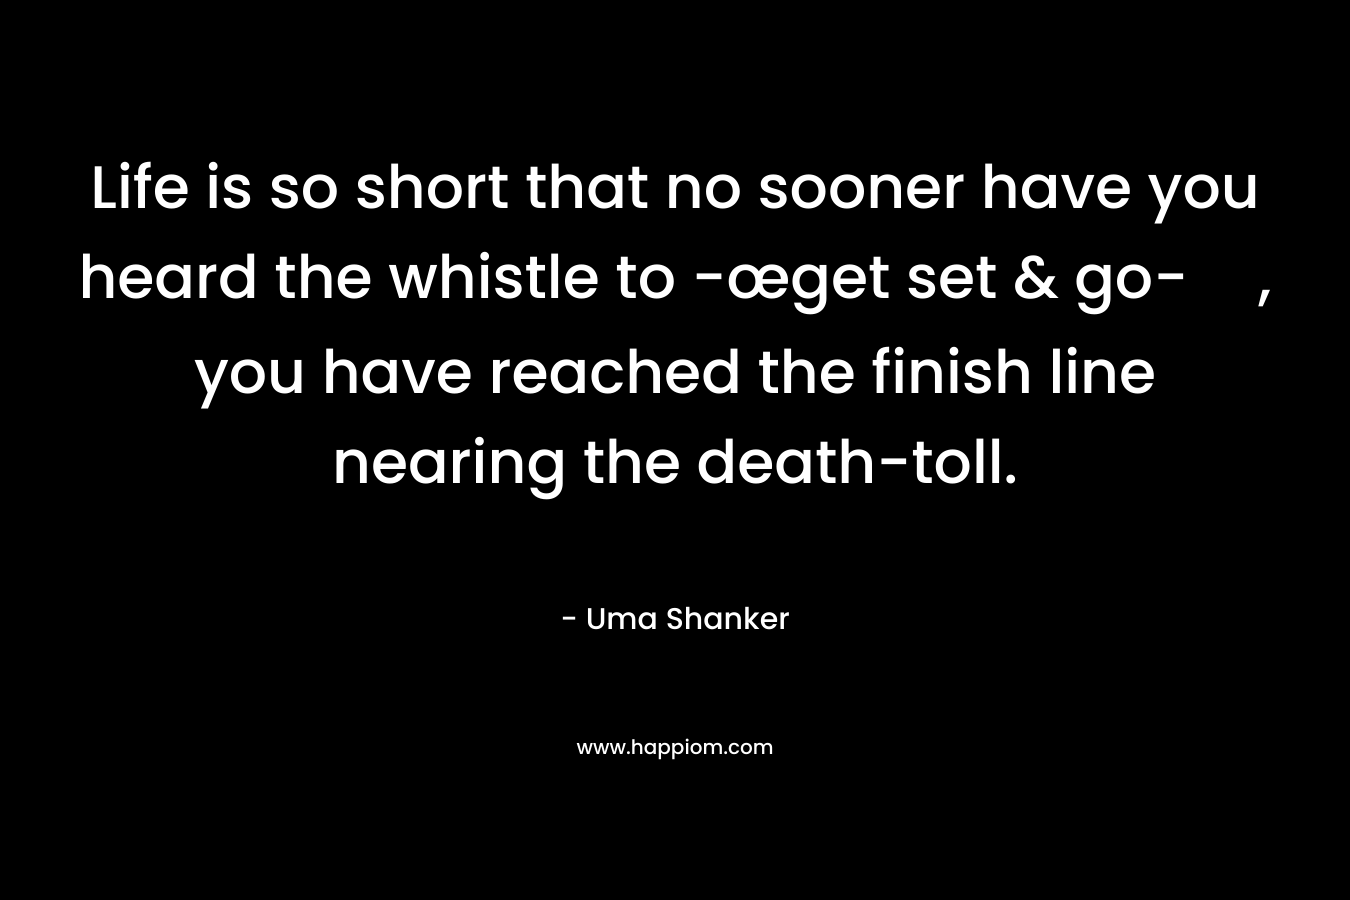 Life is so short that no sooner have you heard the whistle to -œget set & go-, you have reached the finish line nearing the death-toll. – Uma Shanker